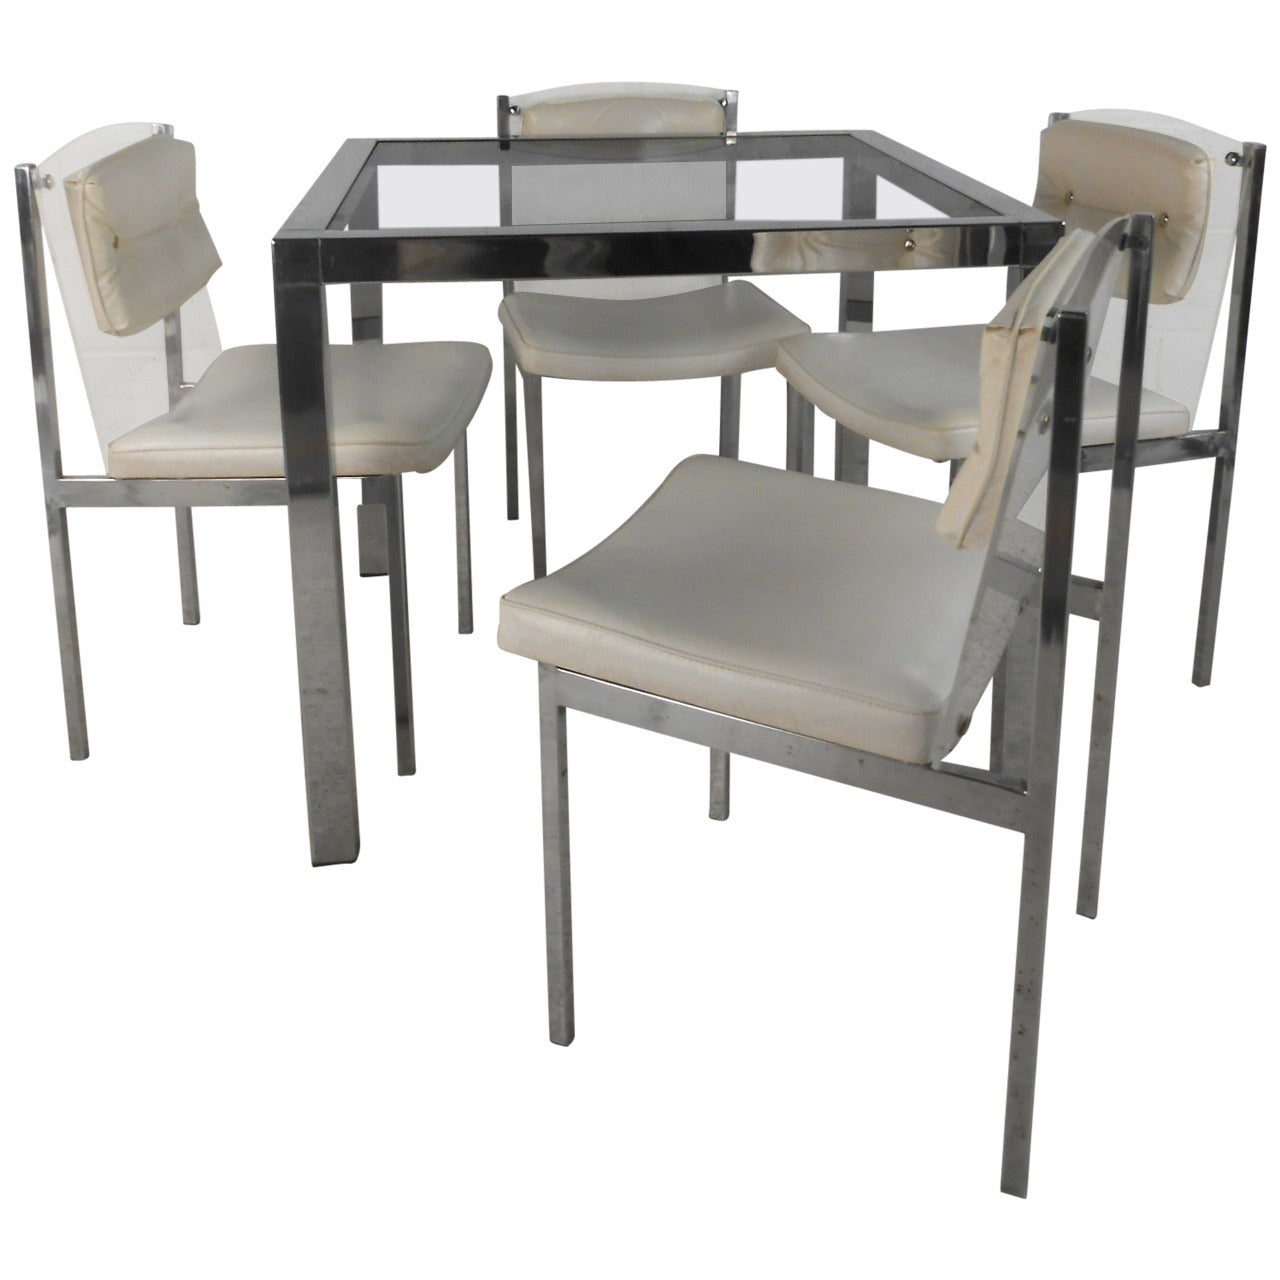 Mid-Century Modern Chrome, Glass, and Lucite Dining Set Table with Chairs  For Sale at 1stDibs | modern chrome chairs, lucite dining chairs, chrome  dining set